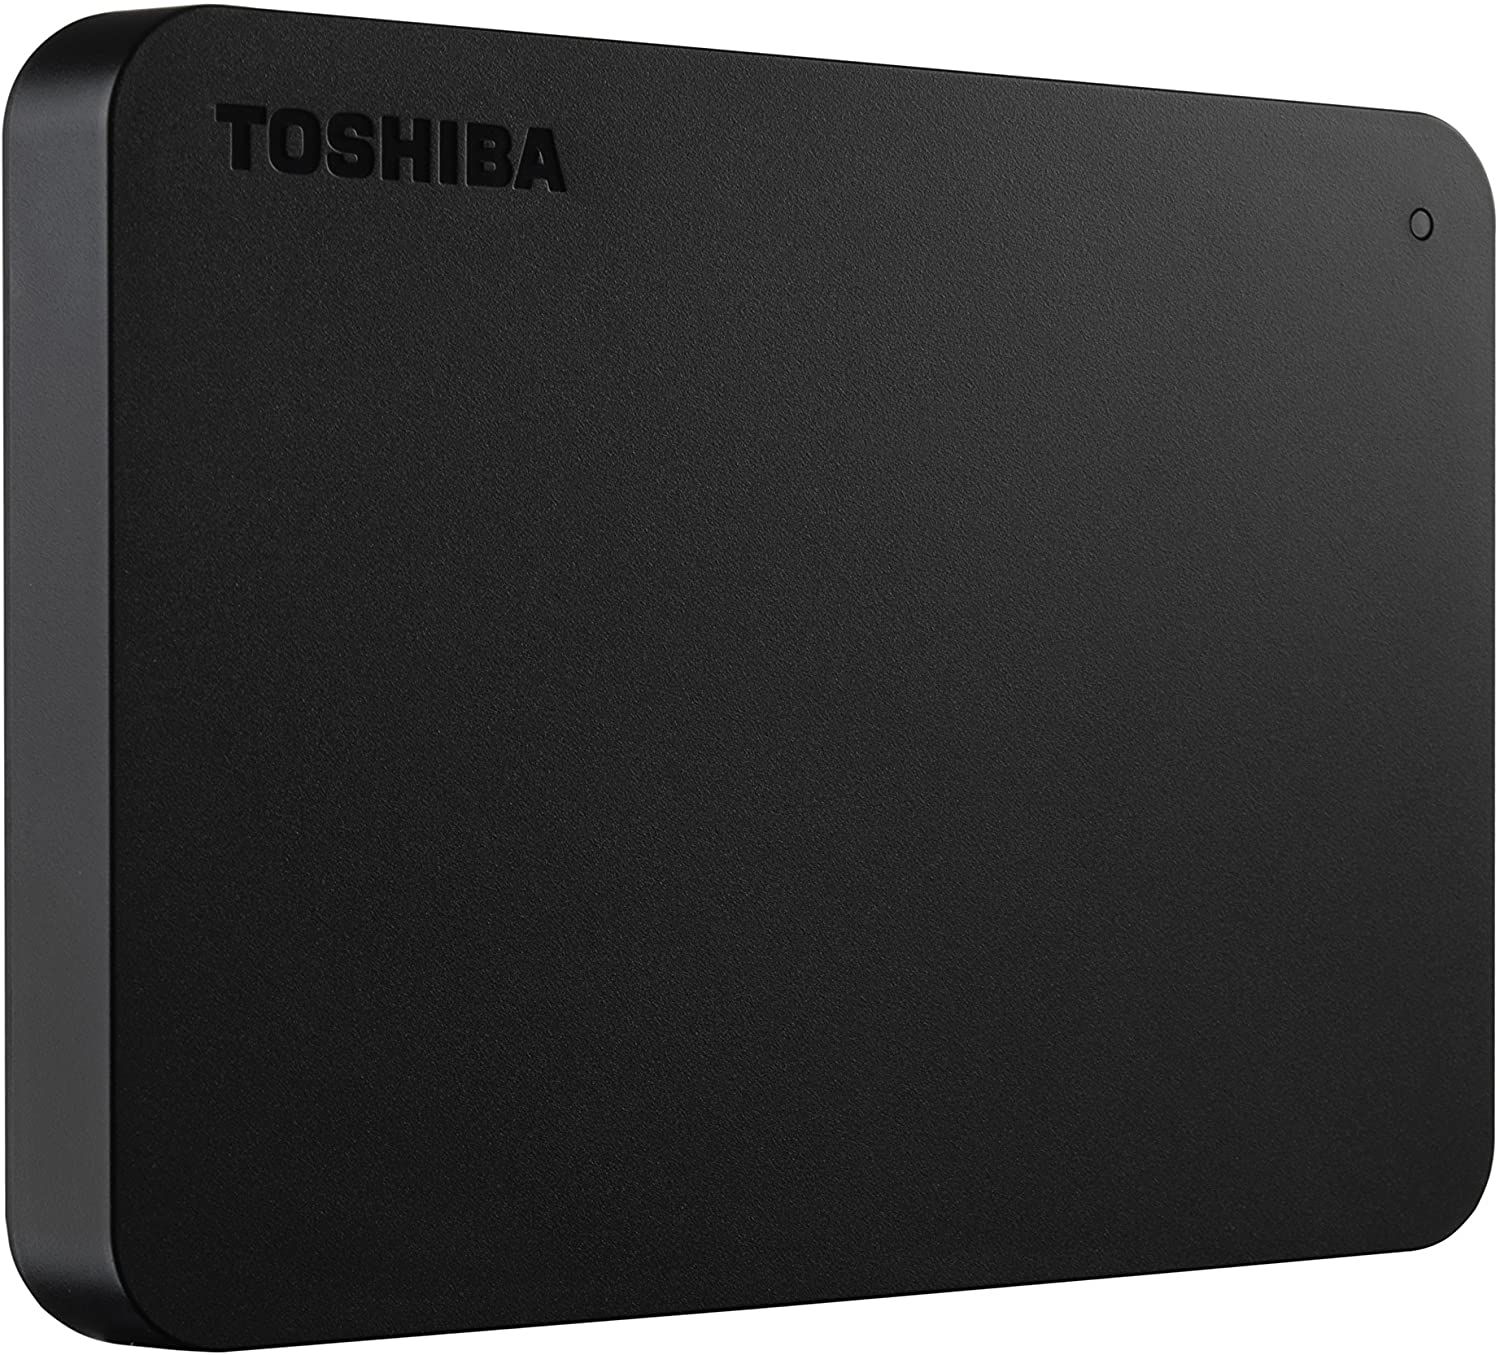 toshiba external hard drive for mac and pc review